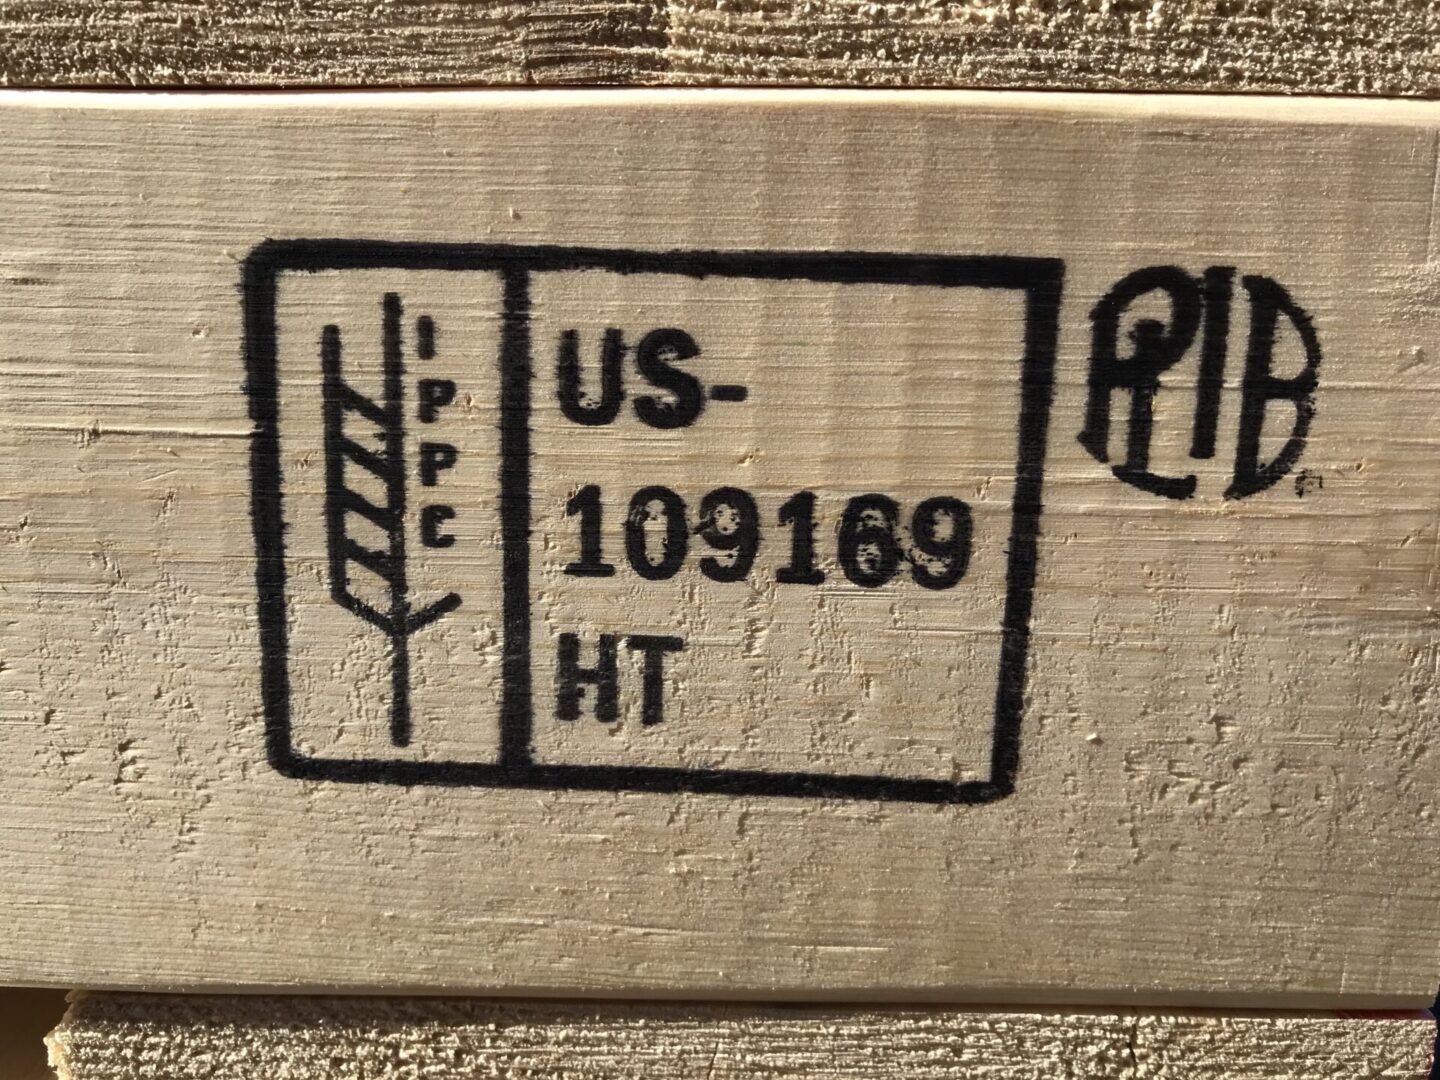 A box with the us 1 0 9 1 6 9 ht stamp on it.